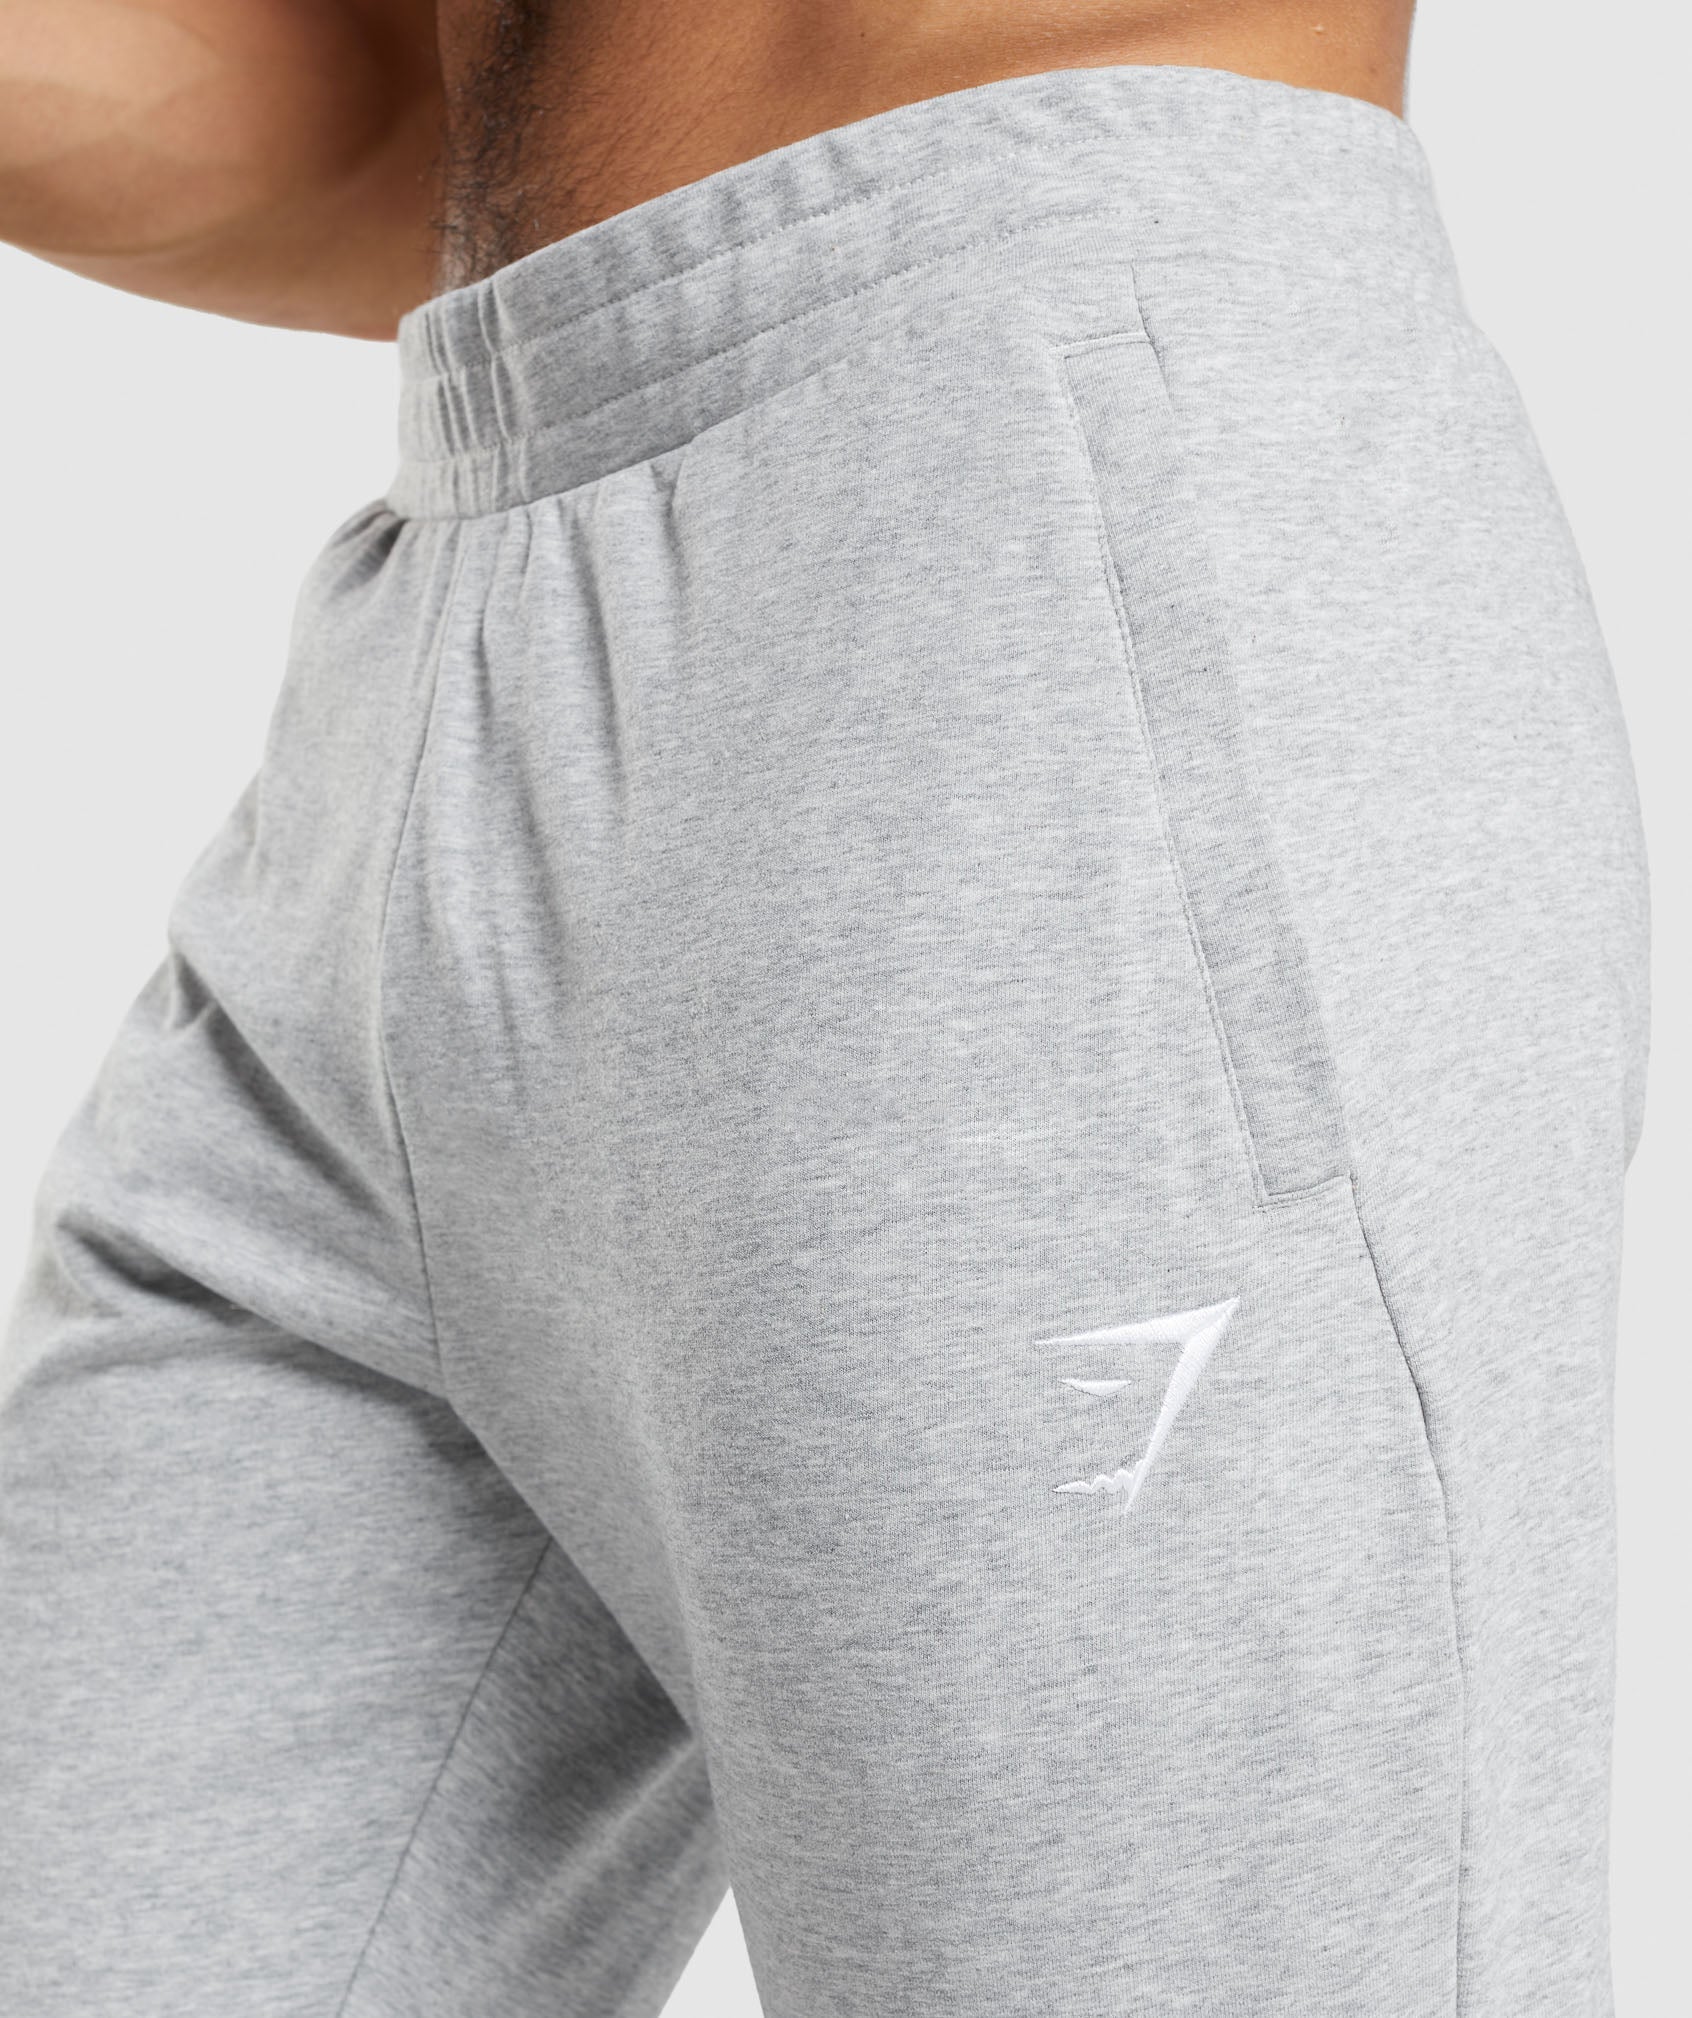 Gymshark Sizing and Comparisons  Luxe Legacy Bottoms and Fit Tapered  Bottoms V 2.0 